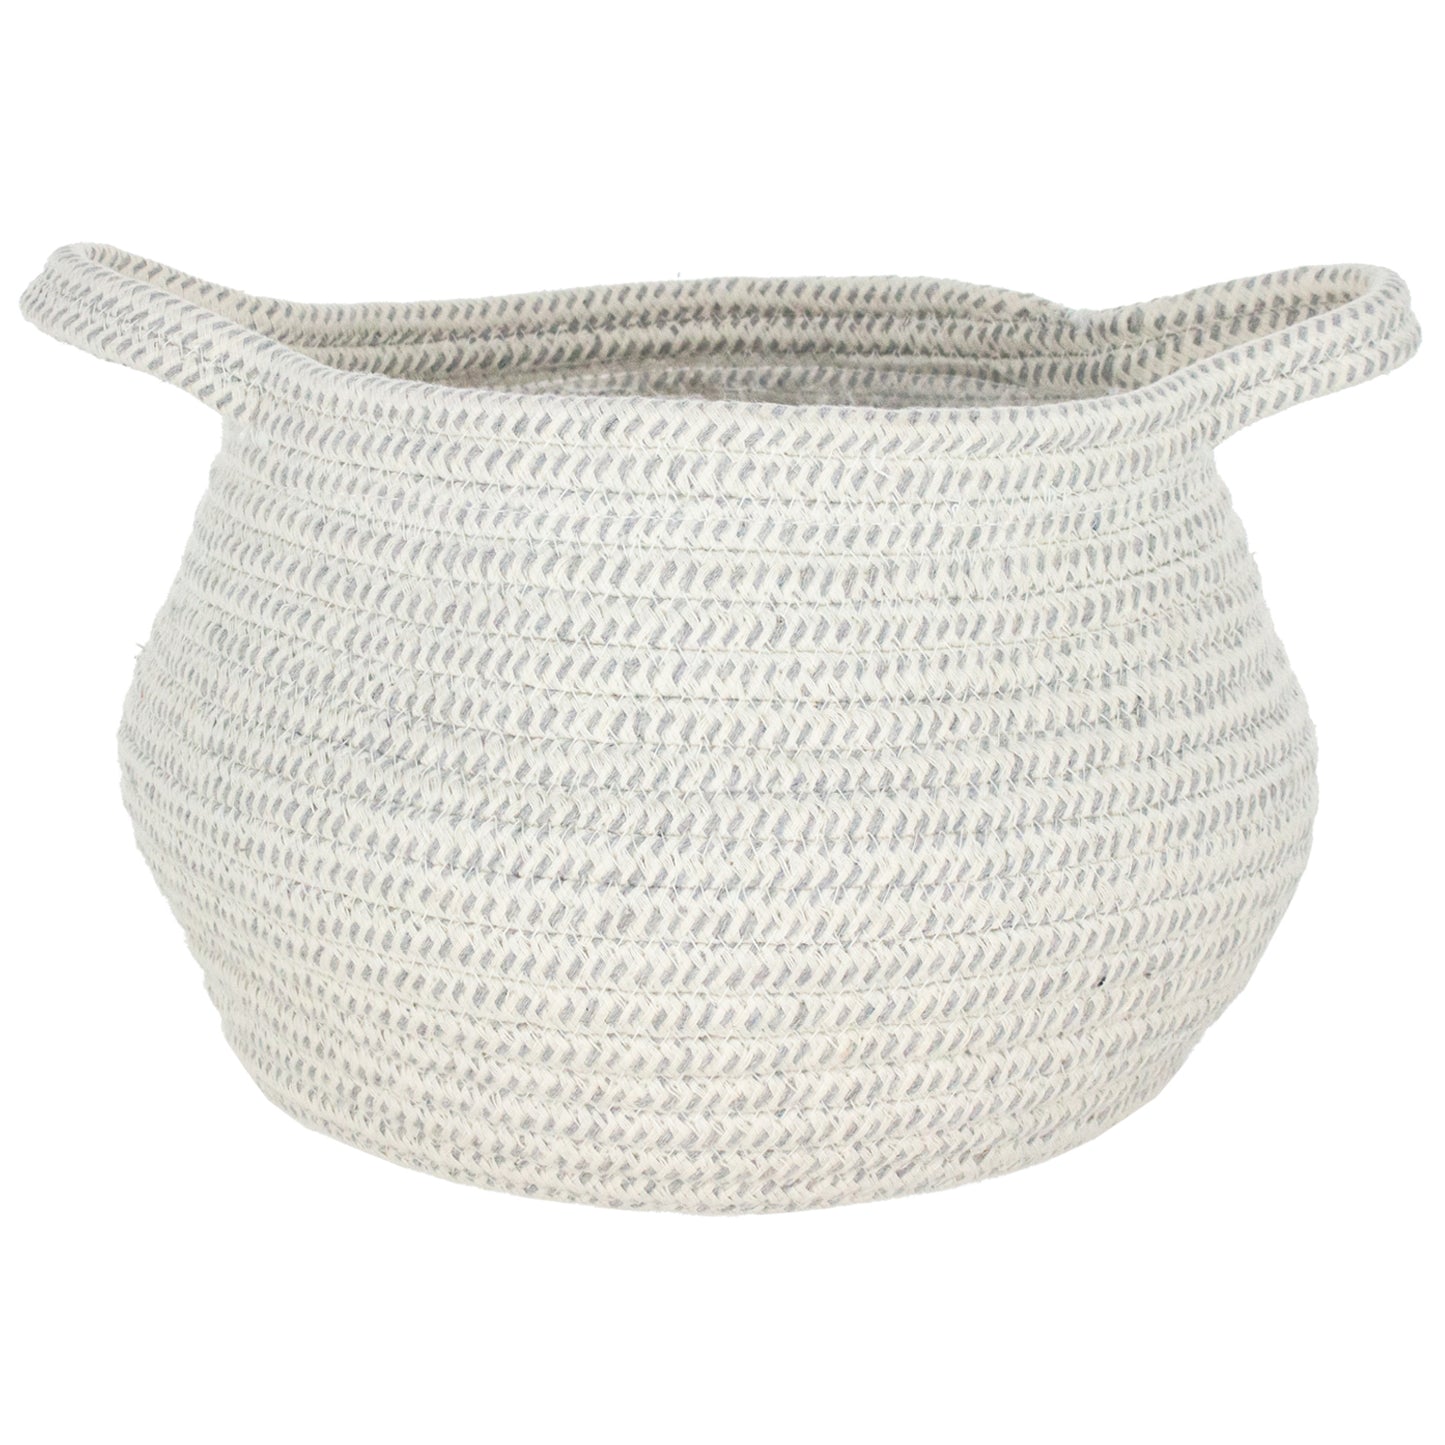 Cable Basket in Heathered Grey